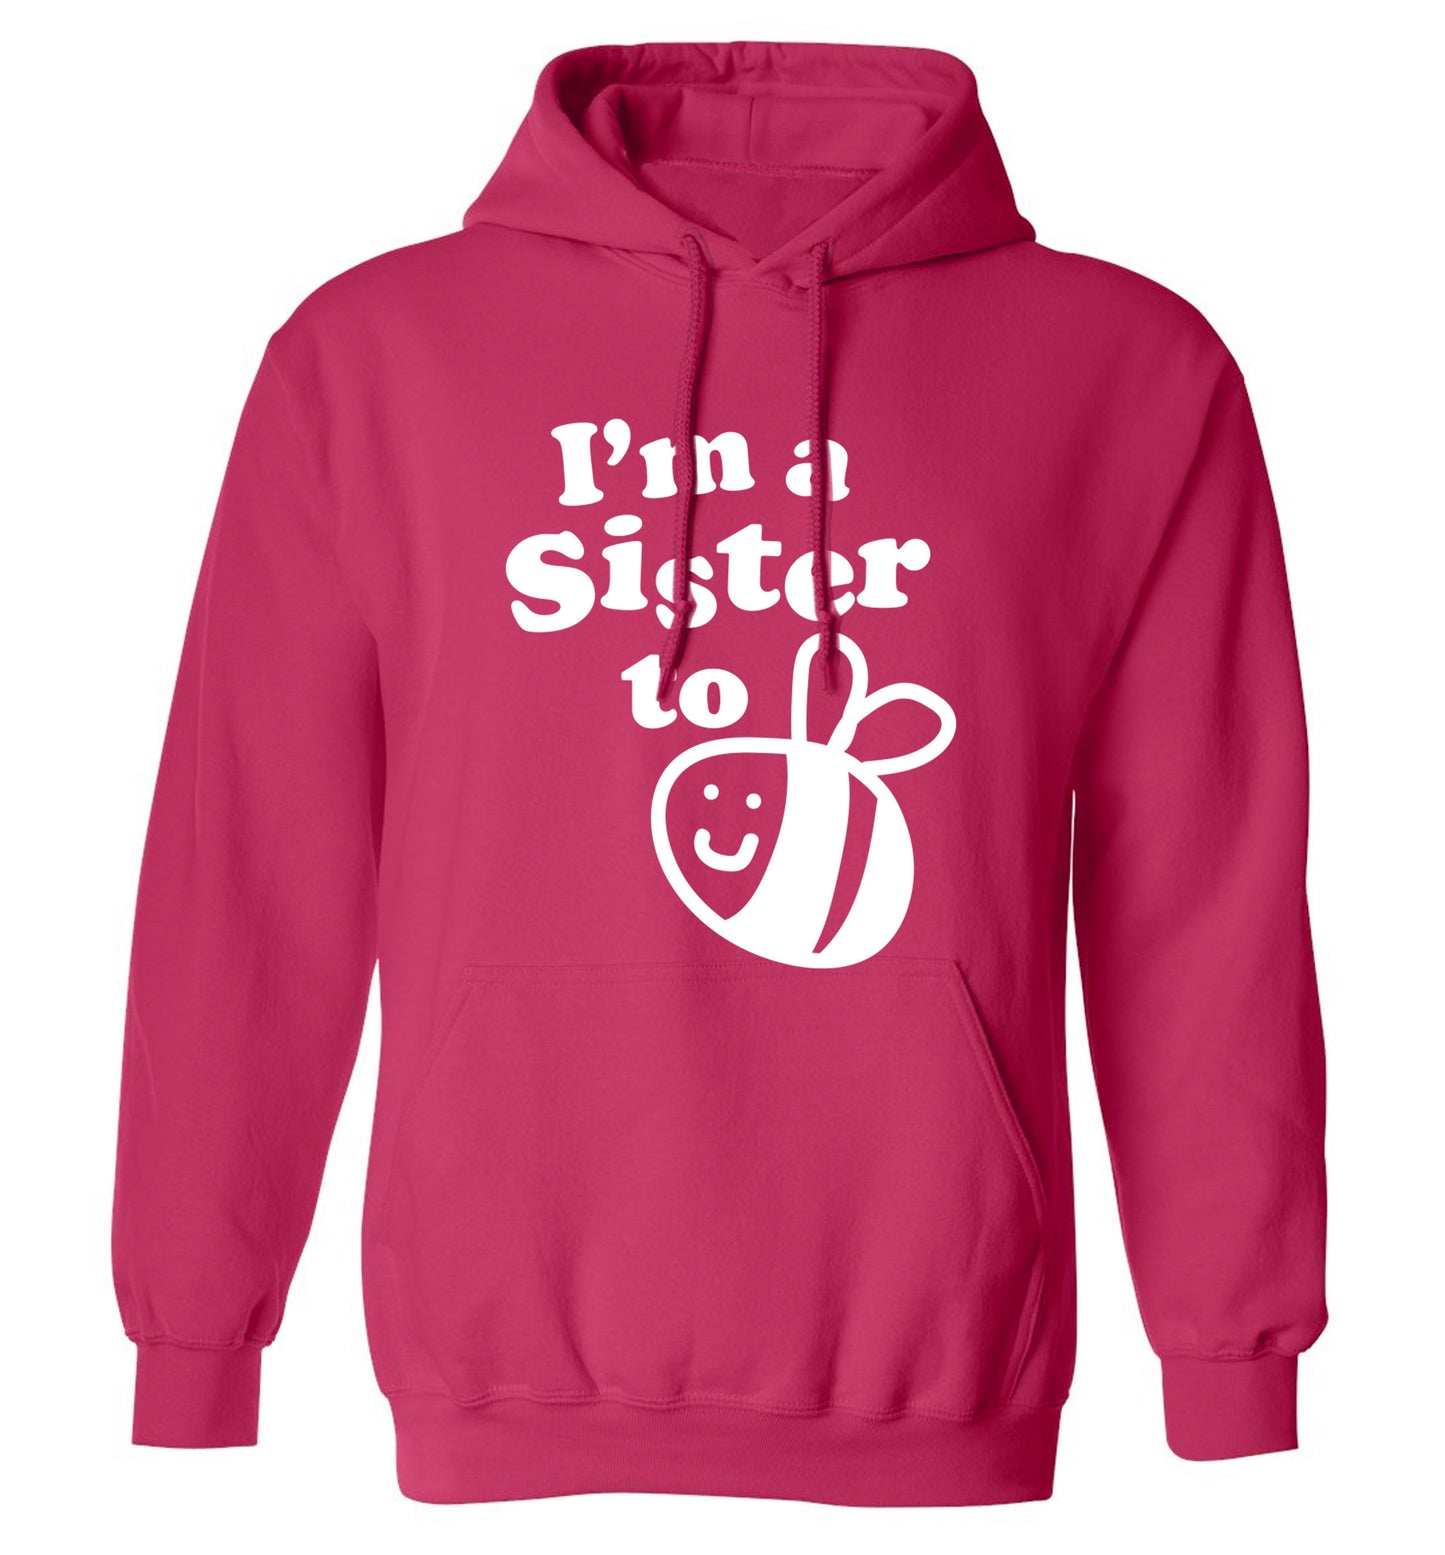 I'm a sister to be adults unisex pink hoodie 2XL